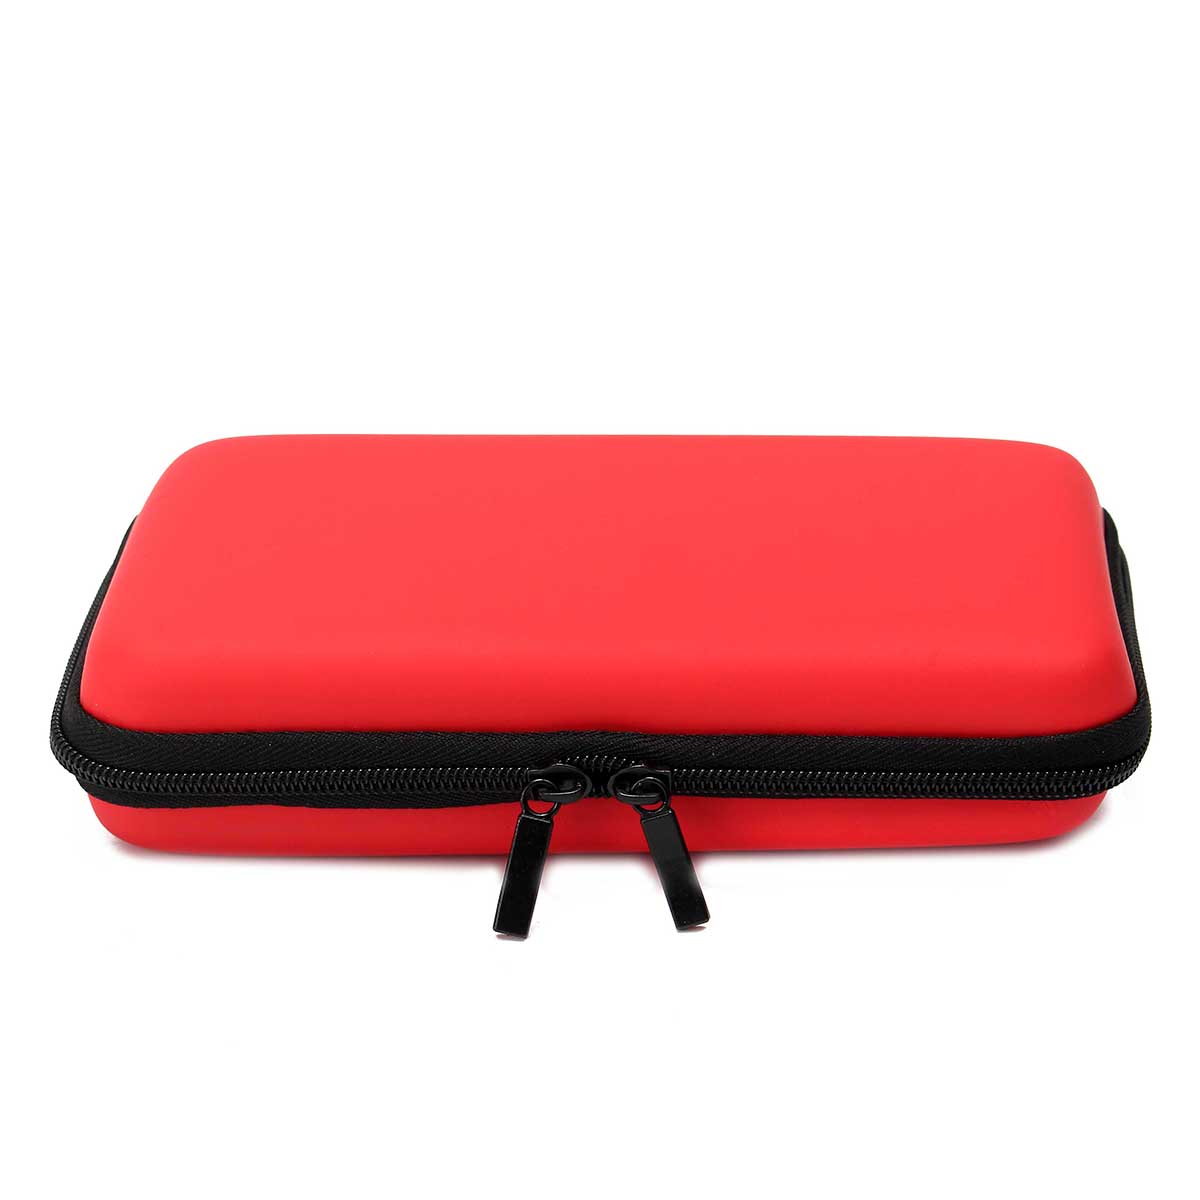 EVA-Hard-Protective-Carrying-Case-Cover-Handle-Bag-For-Nintendo-New-2DS-LLXL-1181569-2